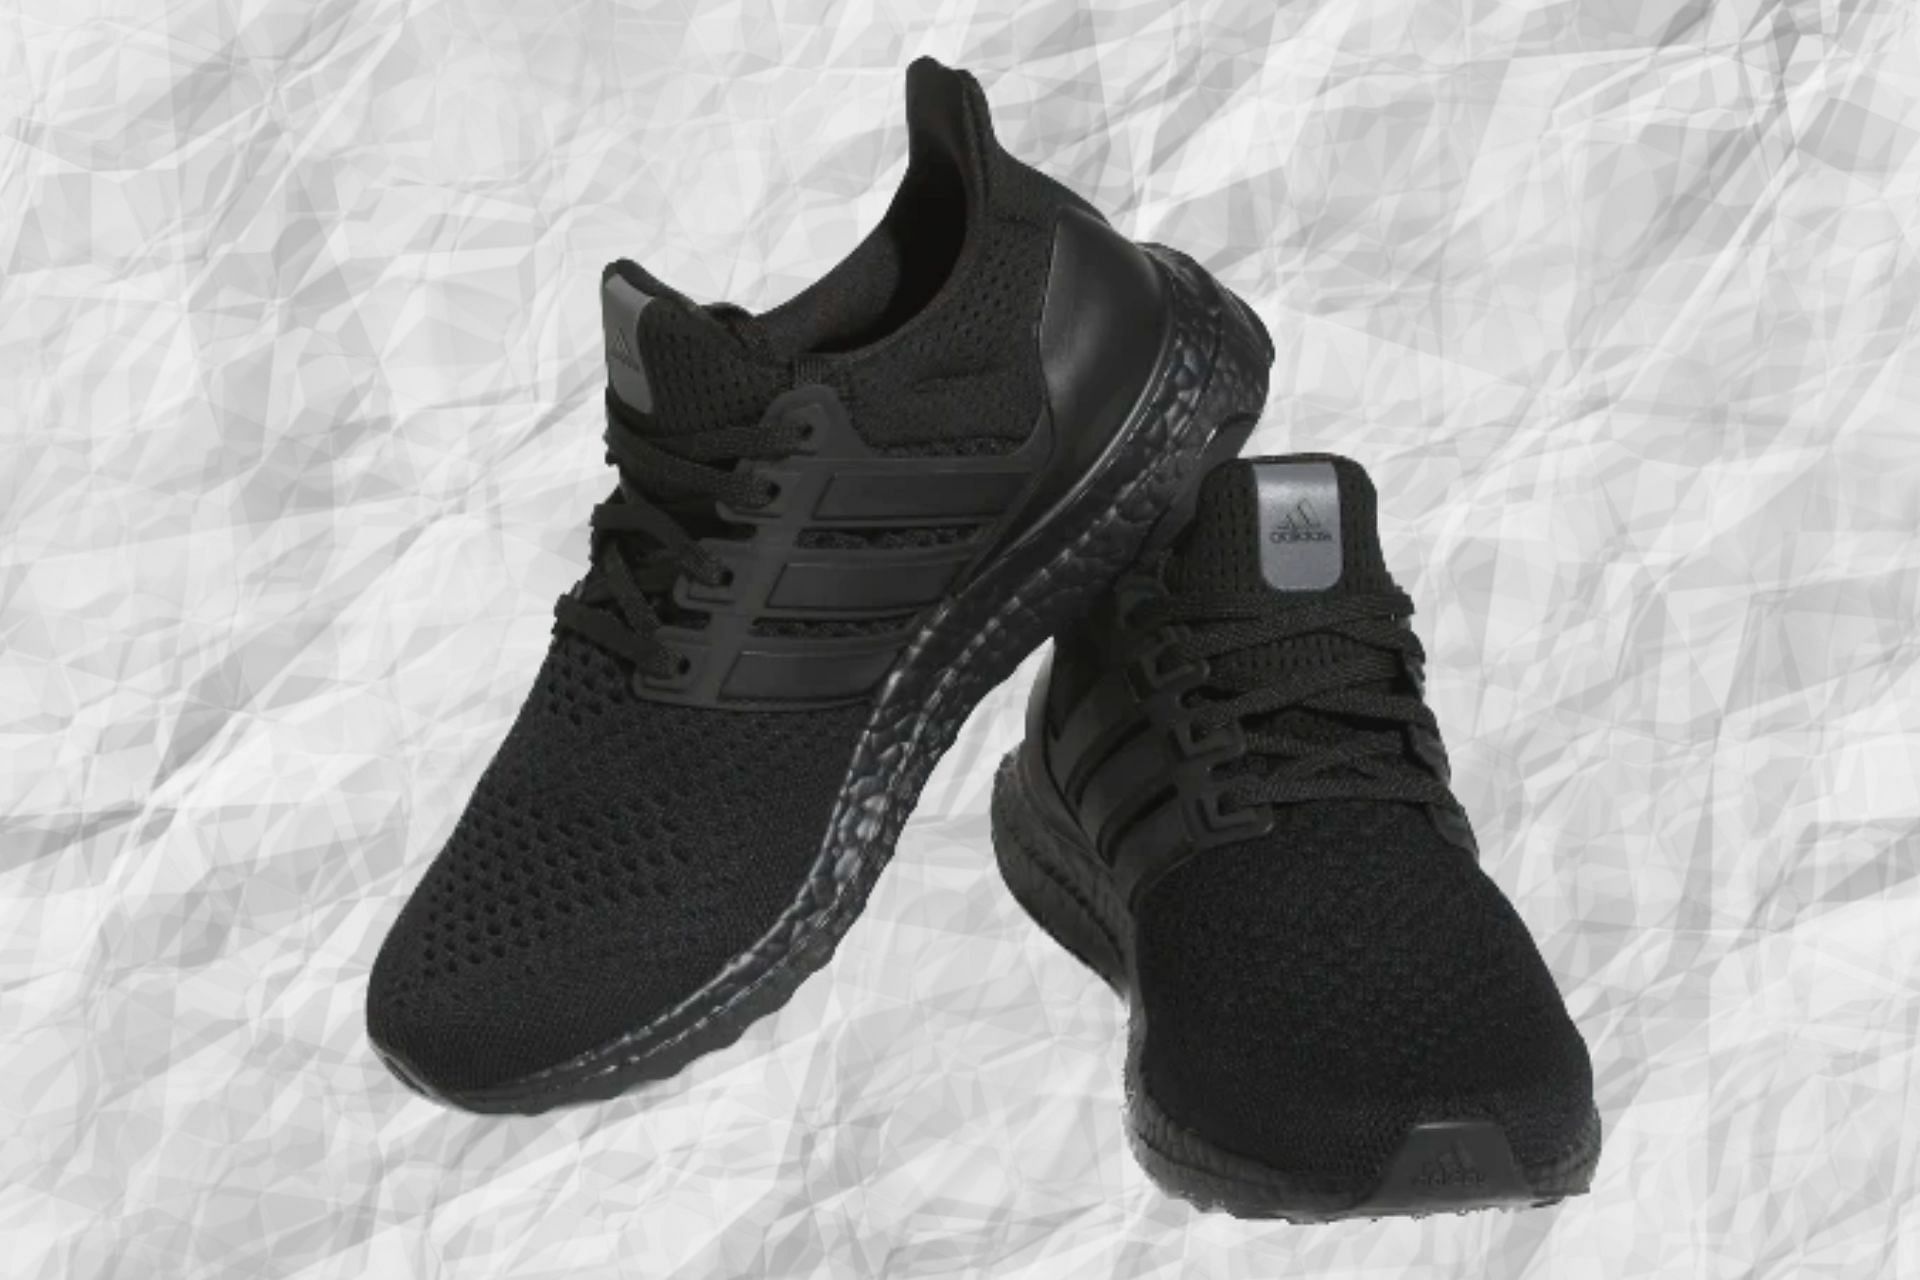 Triple Black: Adidas UltraBOOST “Triple Black” shoes: to buy, release date, and more explored